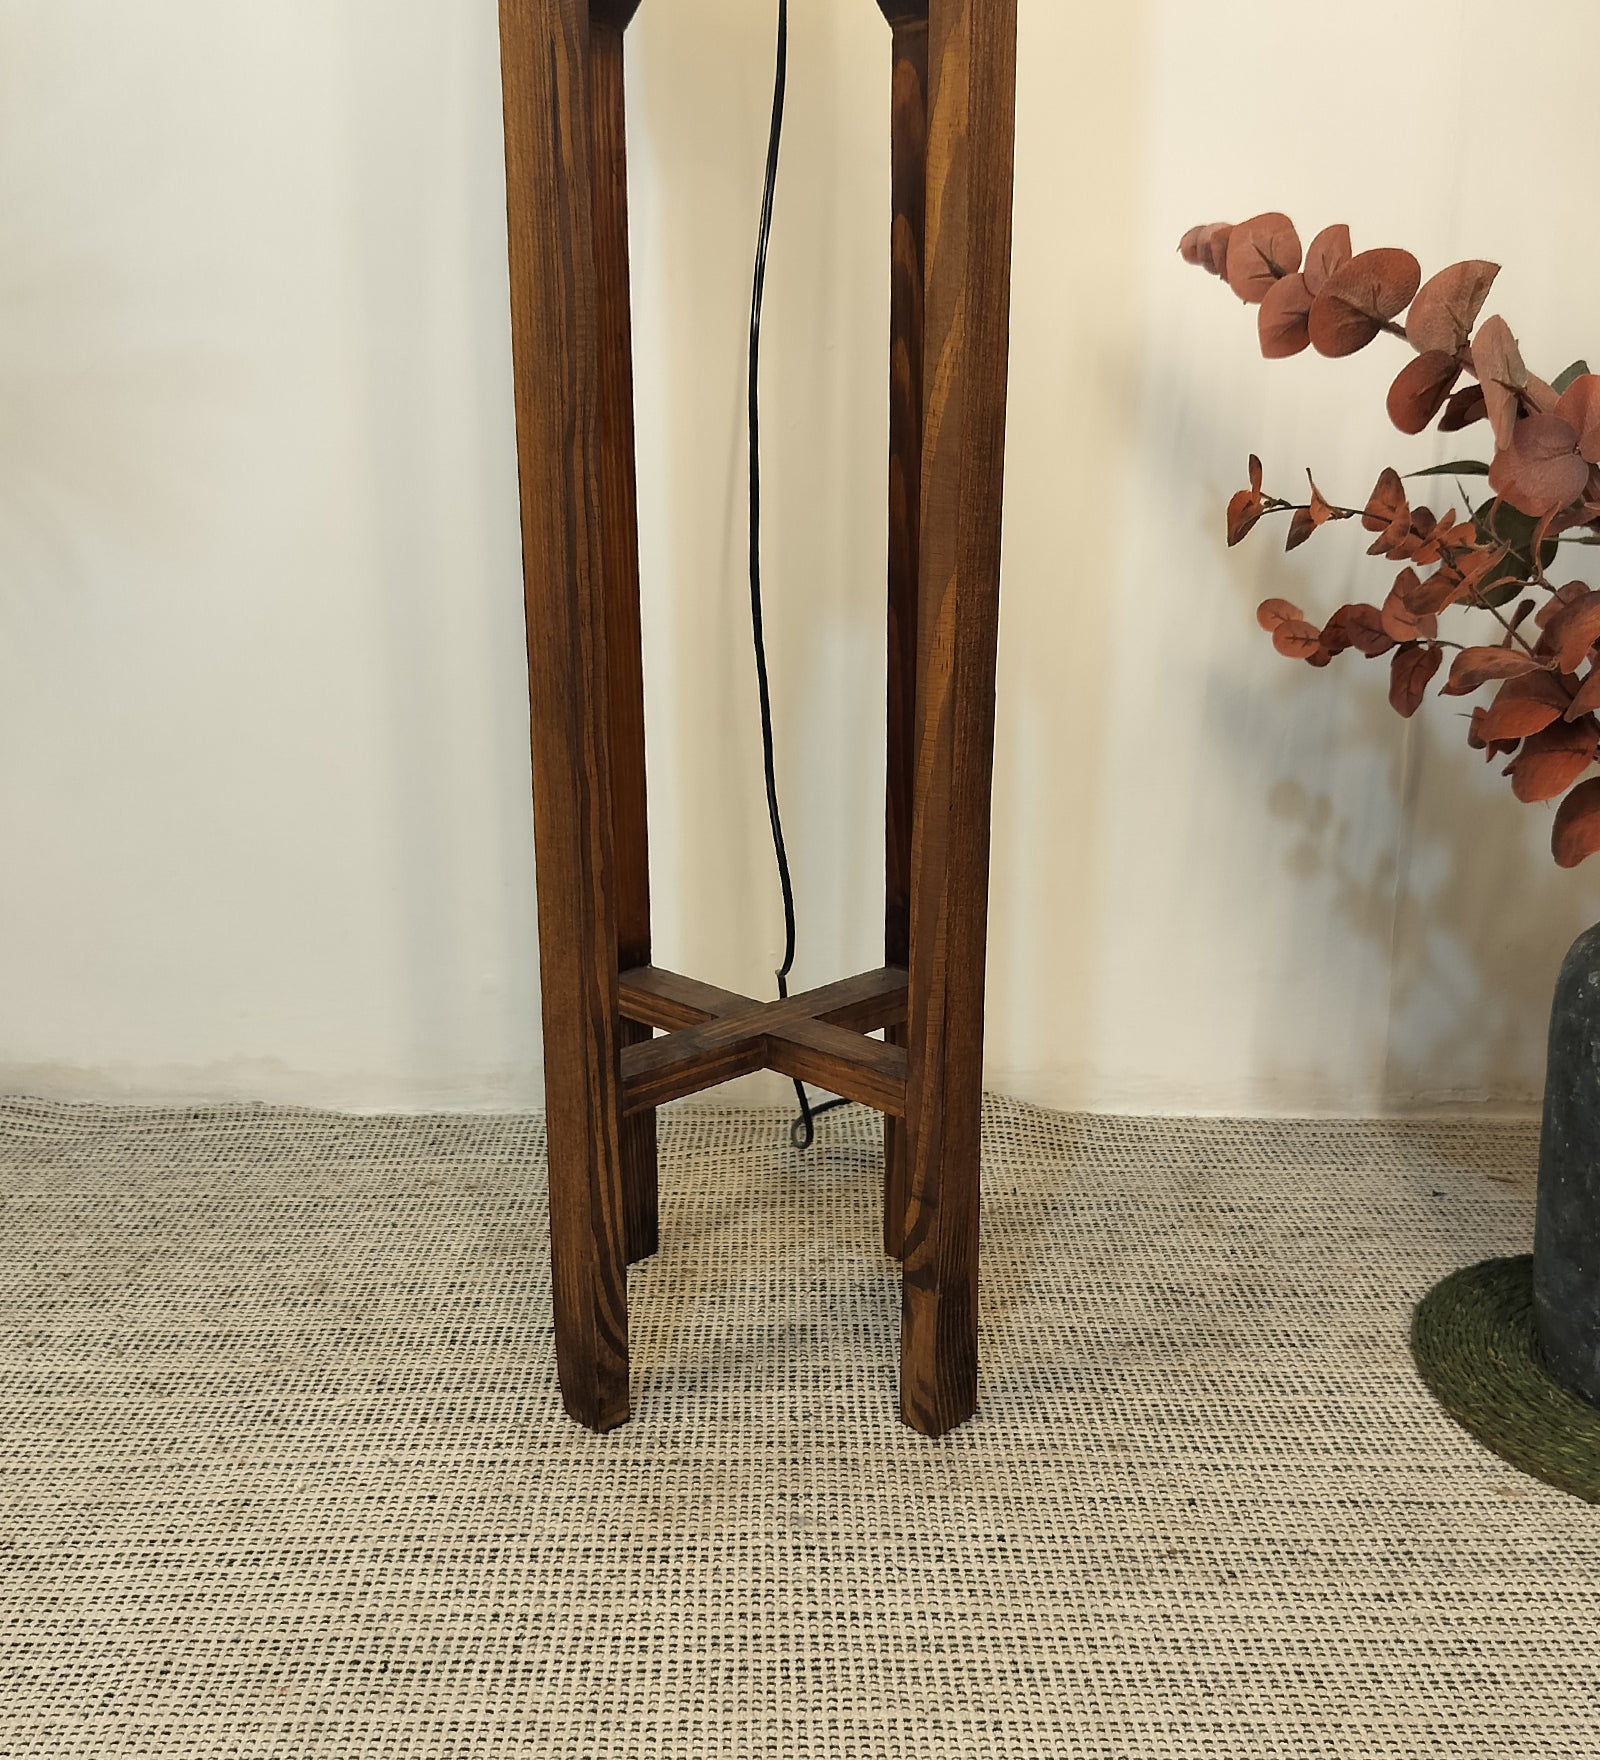 Sputnik Wooden Floor Lamp with Brown Base and Beige Fabric Lampshade (BULB NOT INCLUDED)